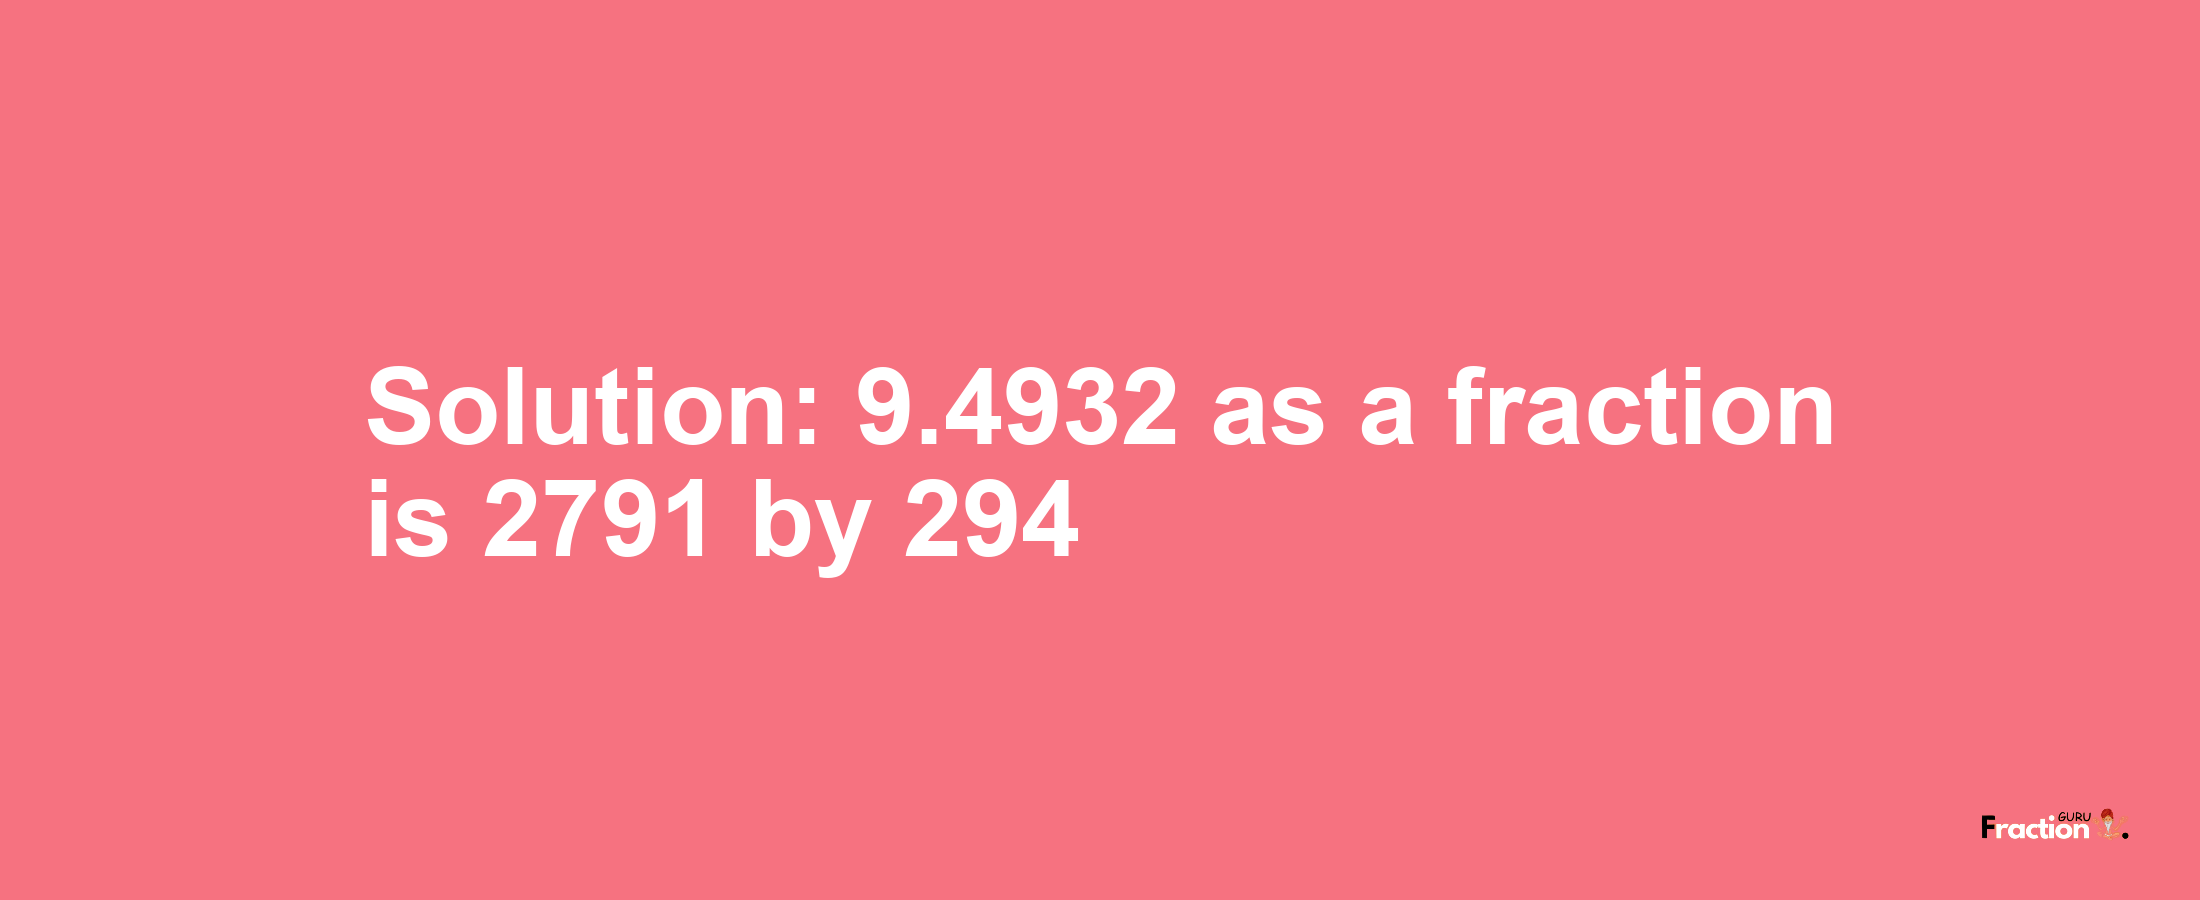 Solution:9.4932 as a fraction is 2791/294